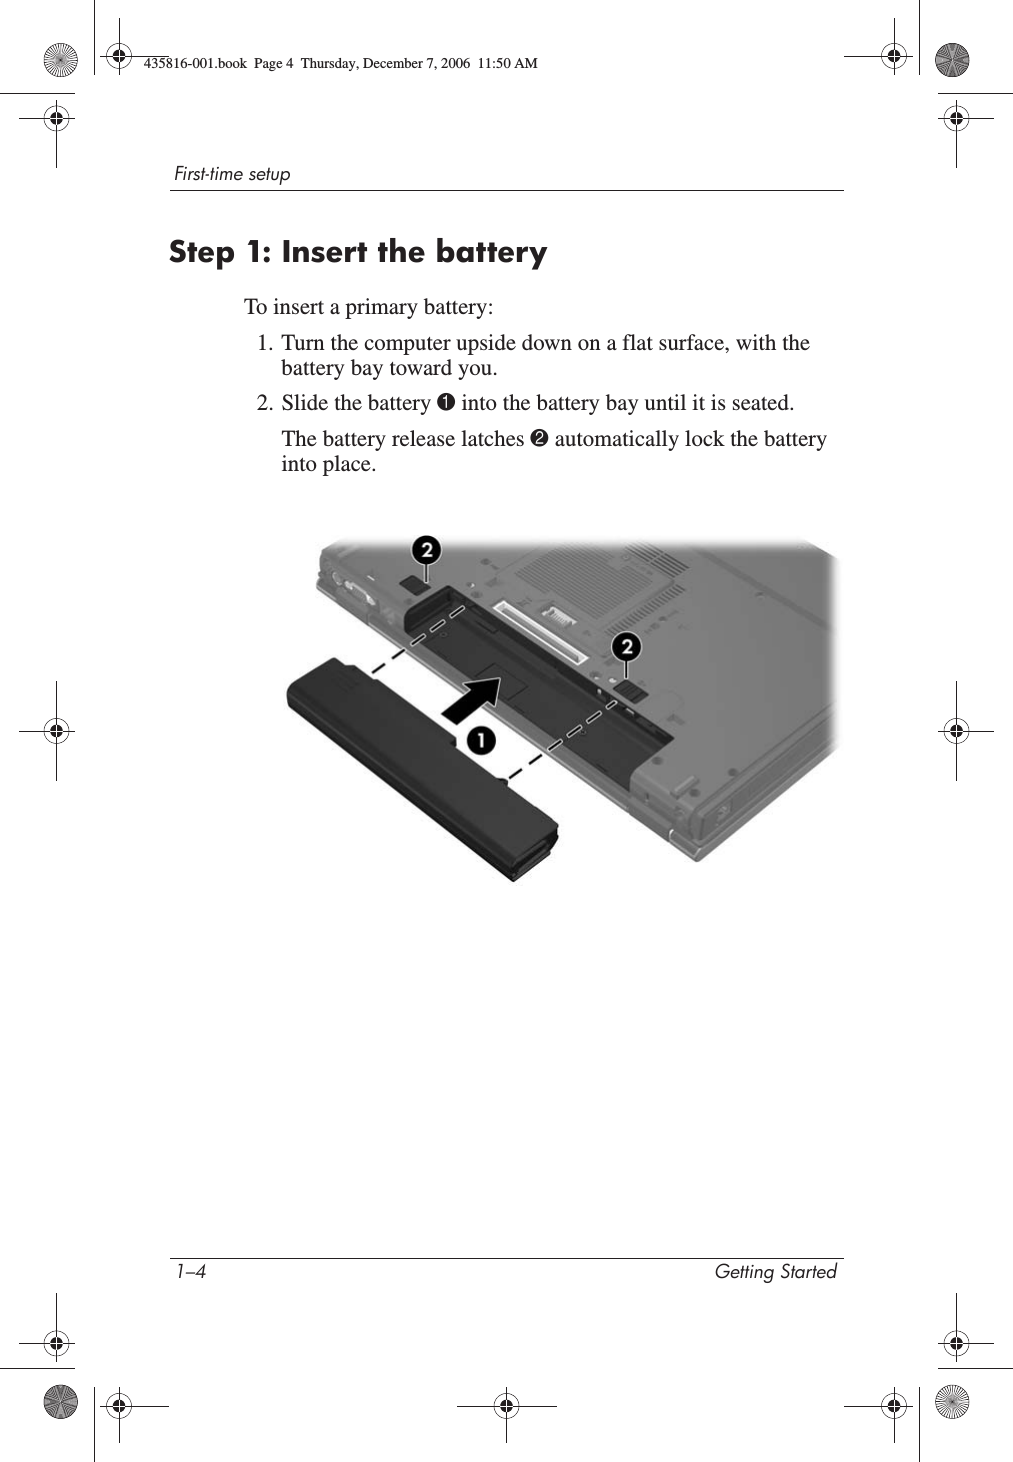 1–4 Getting StartedFirst-time setupStep 1: Insert the batteryTo insert a primary battery:1. Turn the computer upside down on a flat surface, with the battery bay toward you.2. Slide the battery 1 into the battery bay until it is seated.The battery release latches 2 automatically lock the battery into place.435816-001.book  Page 4  Thursday, December 7, 2006  11:50 AM